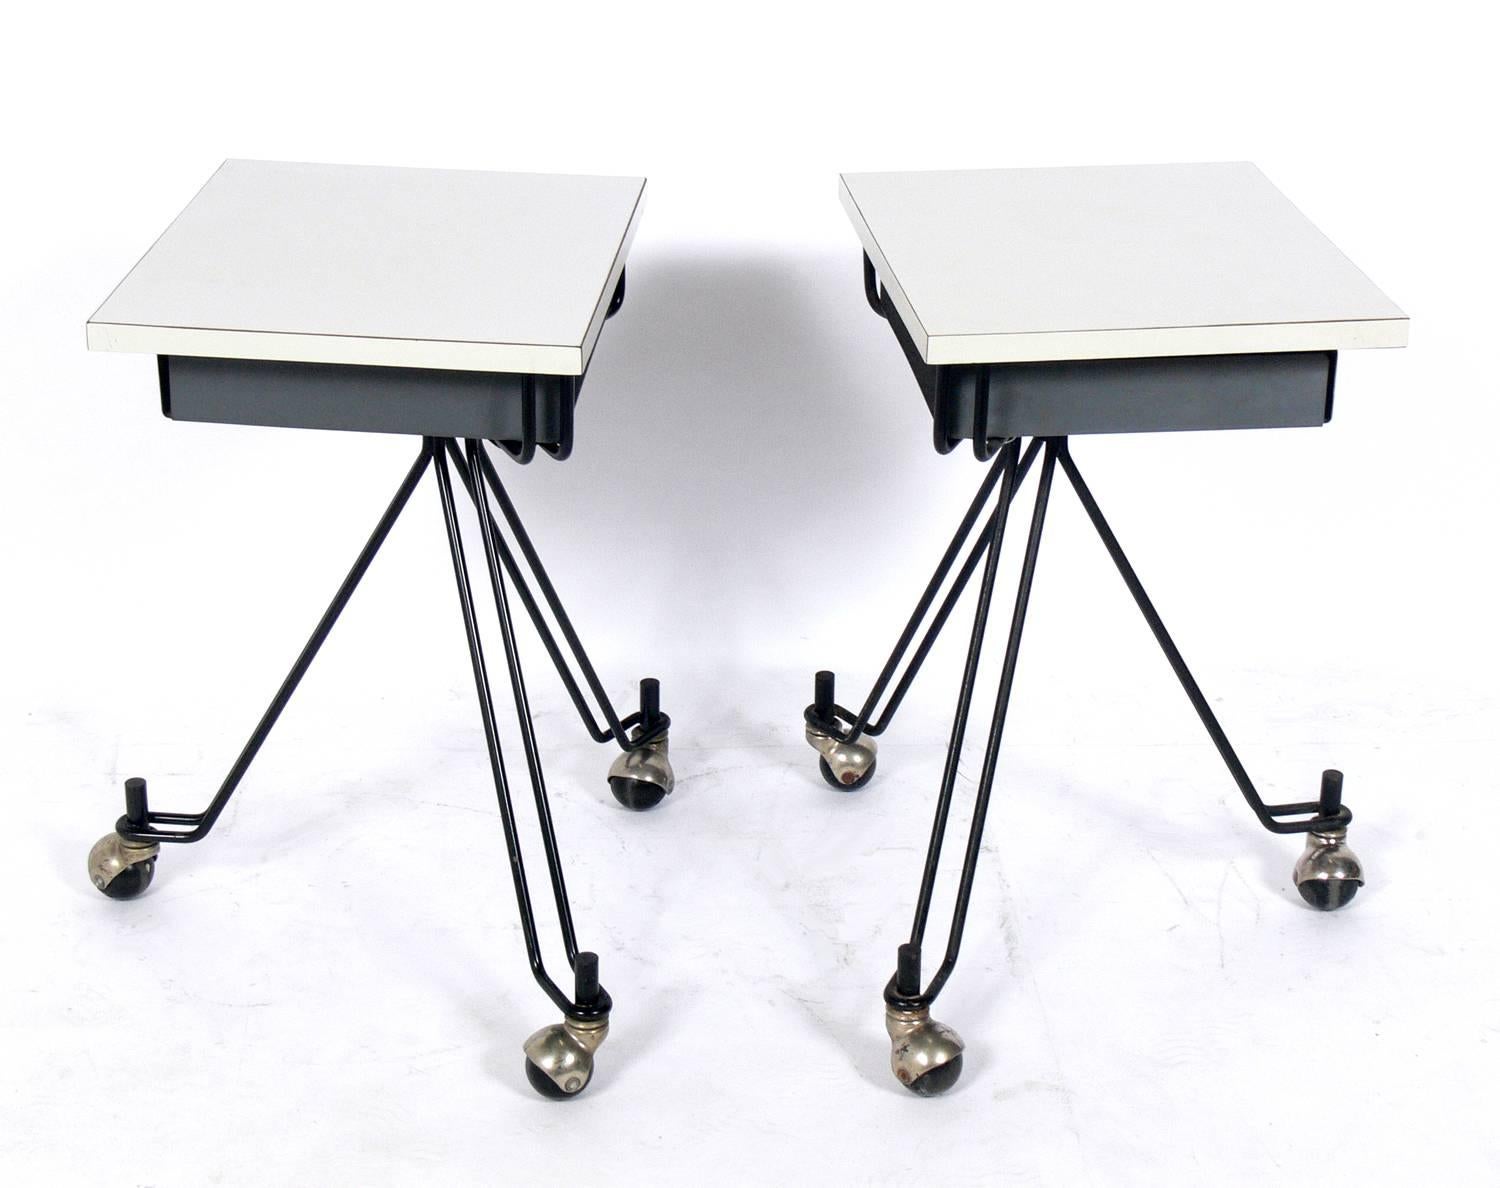 Pair of sculptural tables or nightstands, designed by Eliot Noyes for IBM, American, circa 1950s.